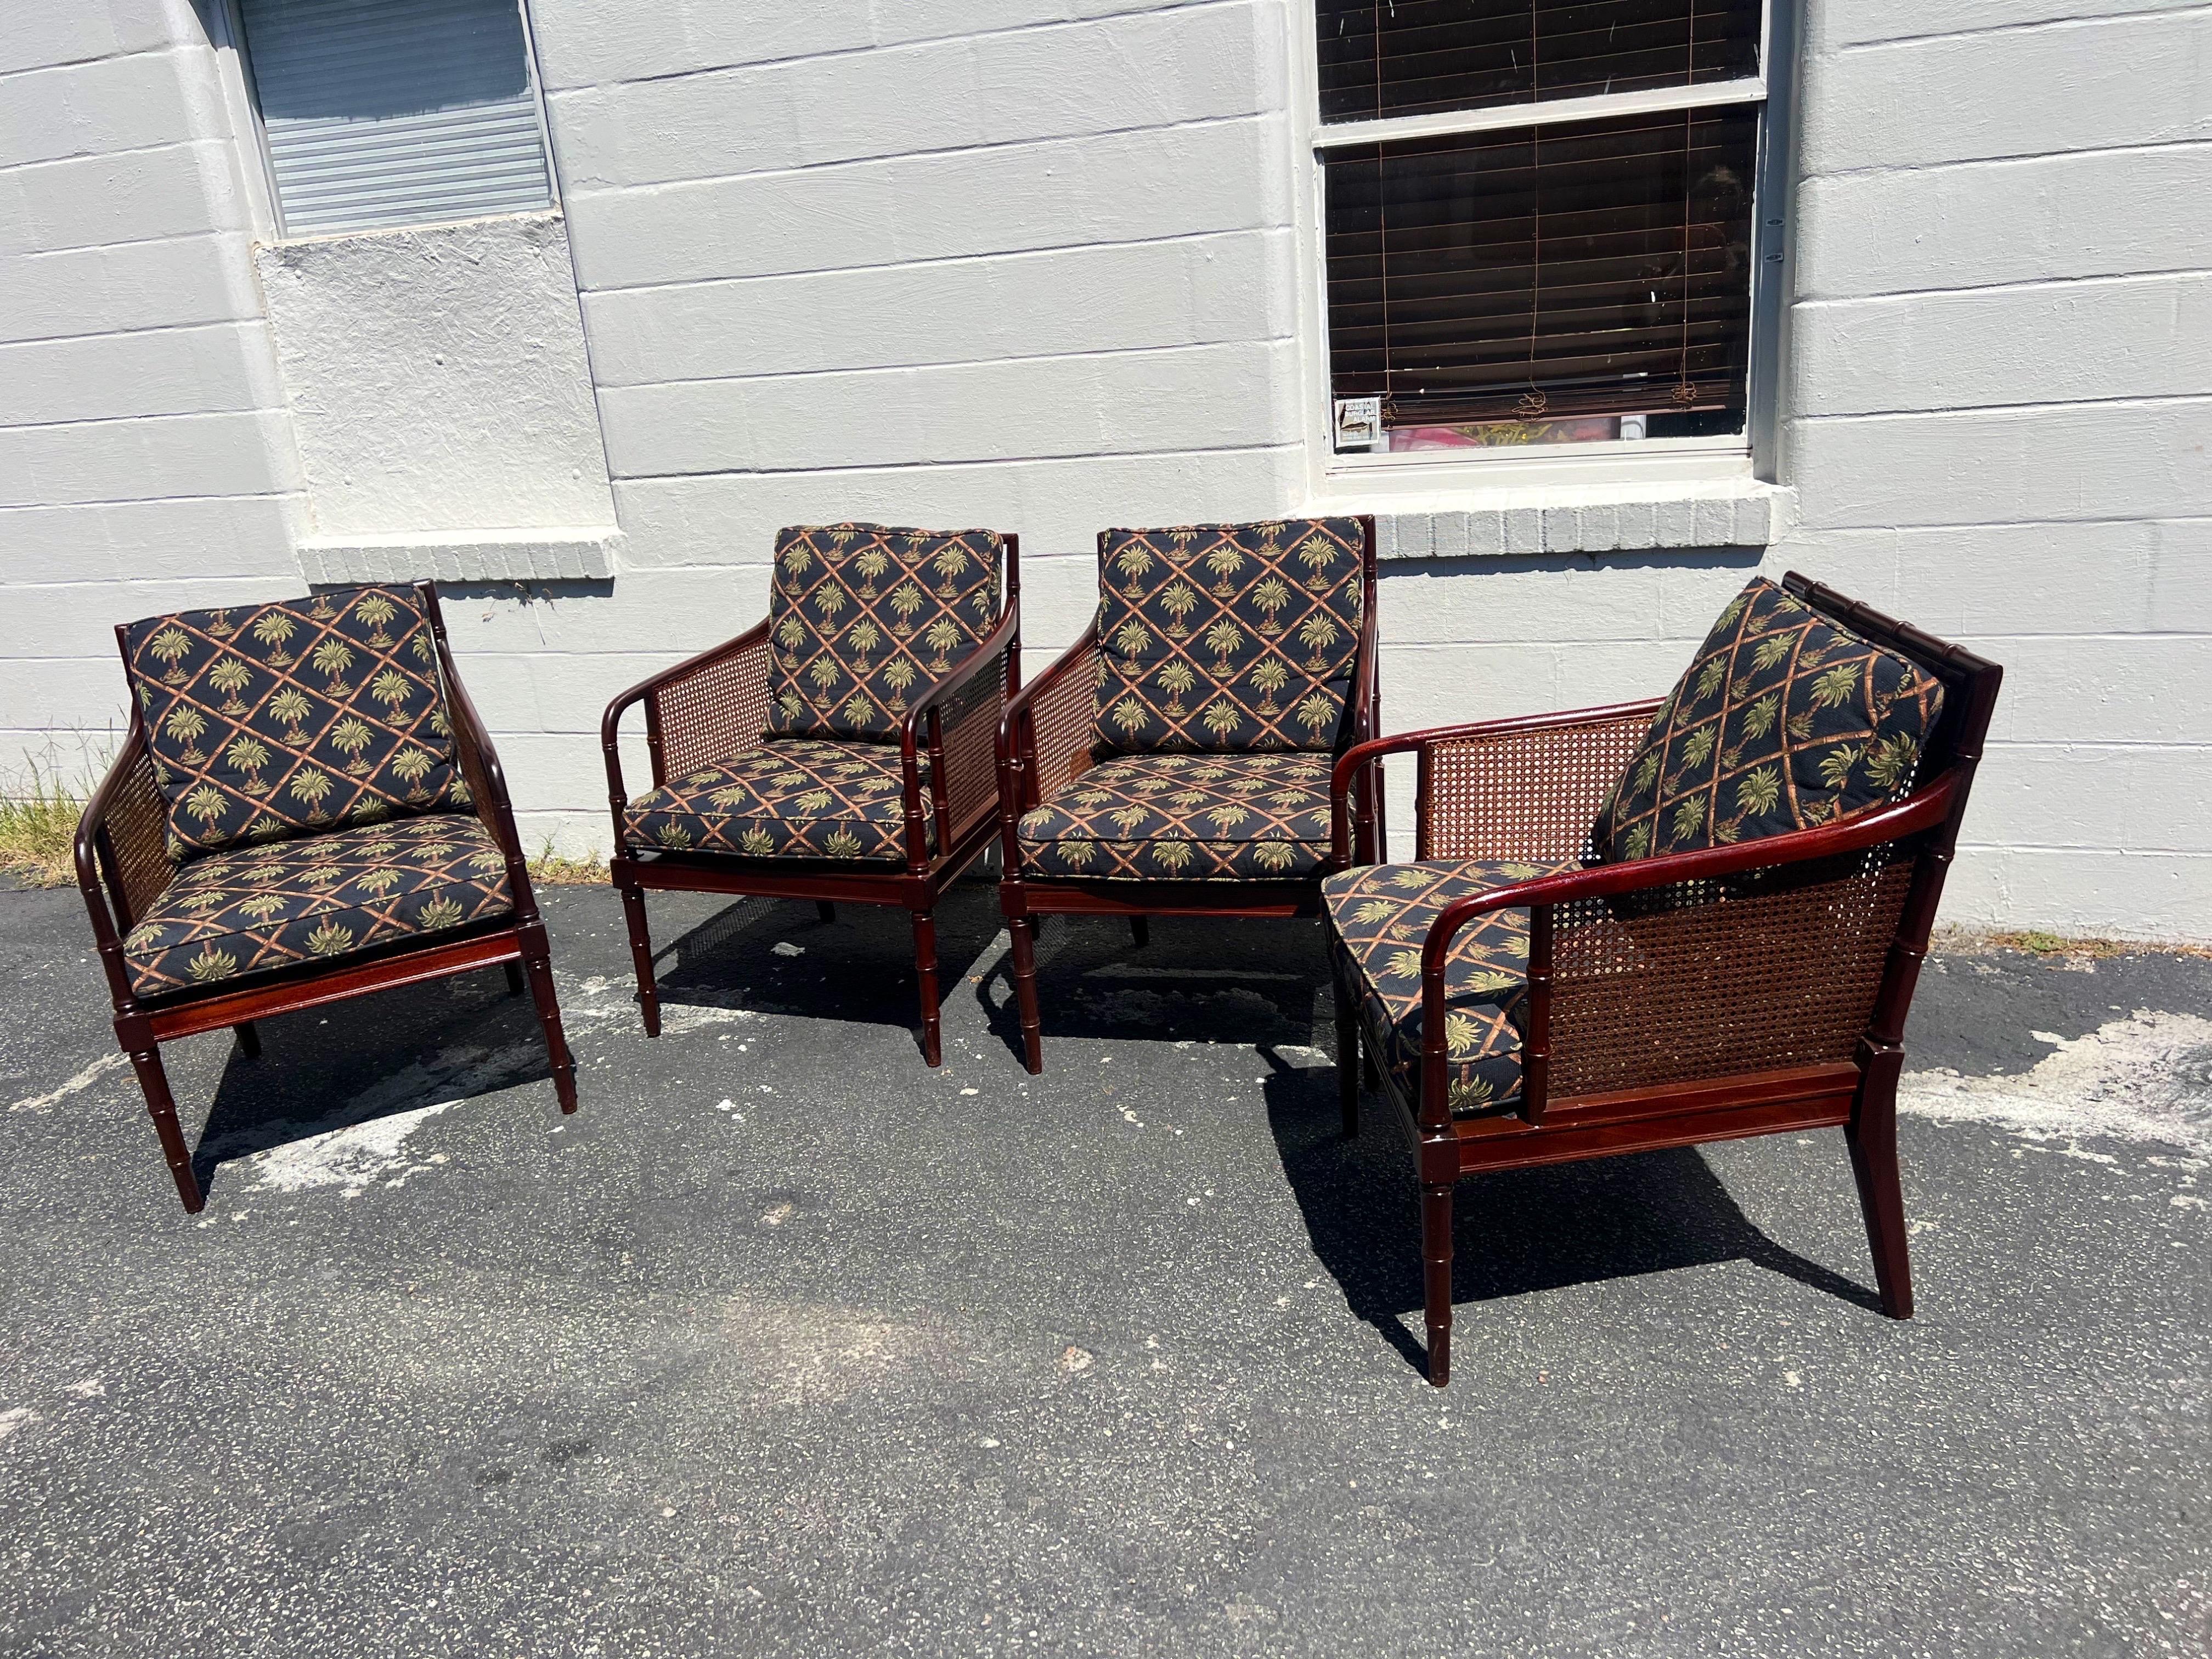 A set of 4 Anglo-indian style mahogany caned armchairs by Hickory Chair Company. 
Seat height with both cushions 19.5”. Newly refinished frames, original caning with no damage. These versatile chairs are great as dining chairs, but cozy enough to